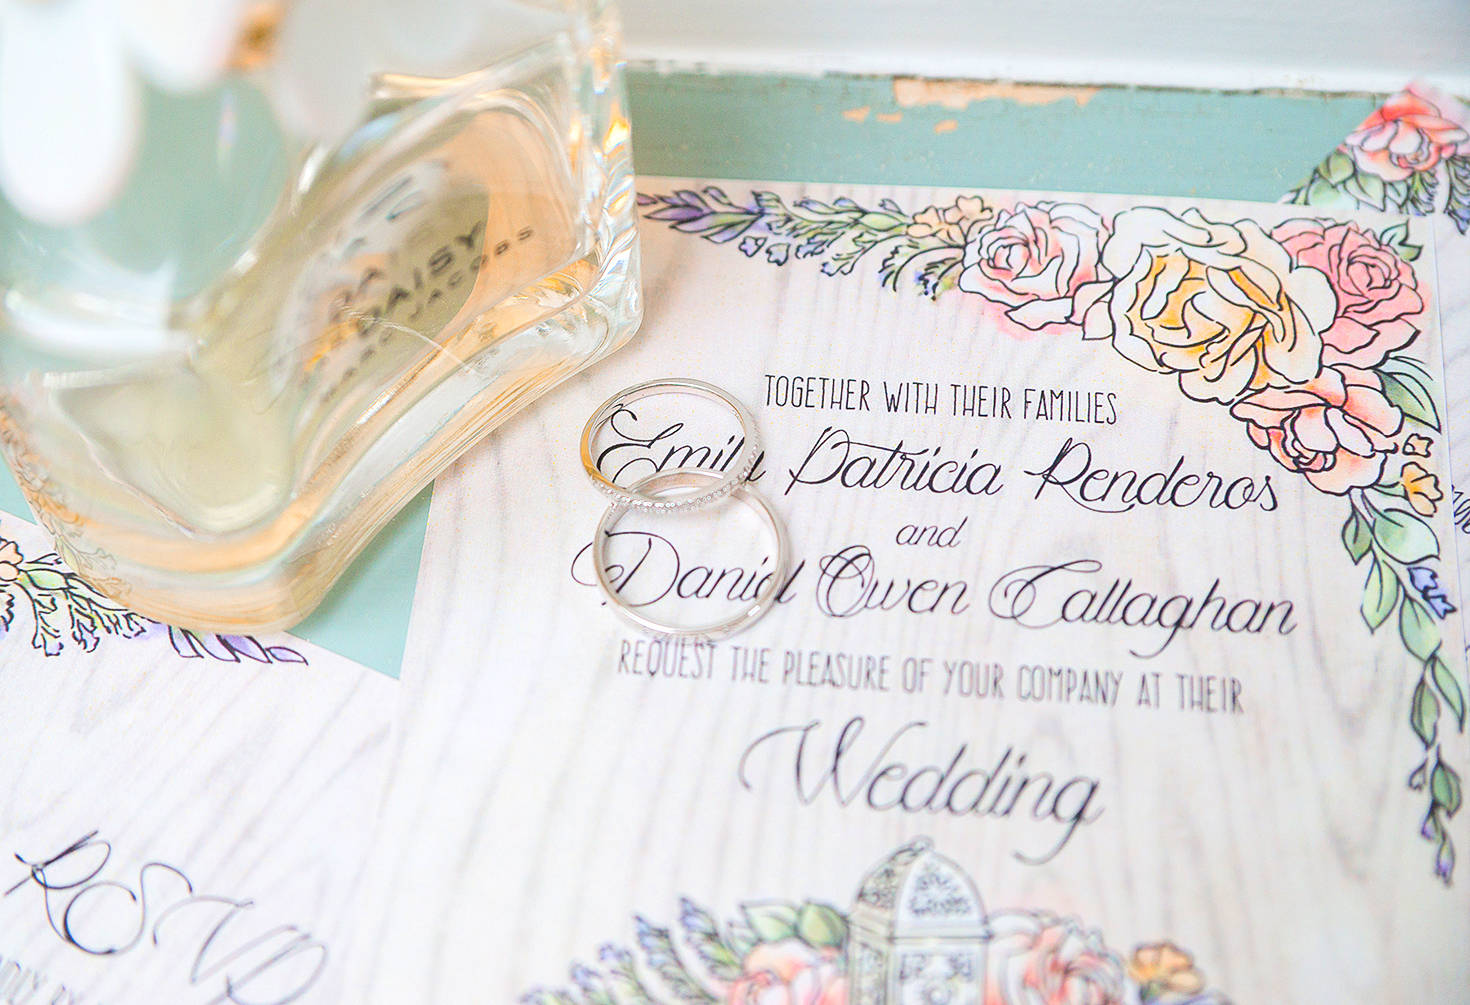 Beautiful details and invitations at Rosedale Manor at Greenwell state park 